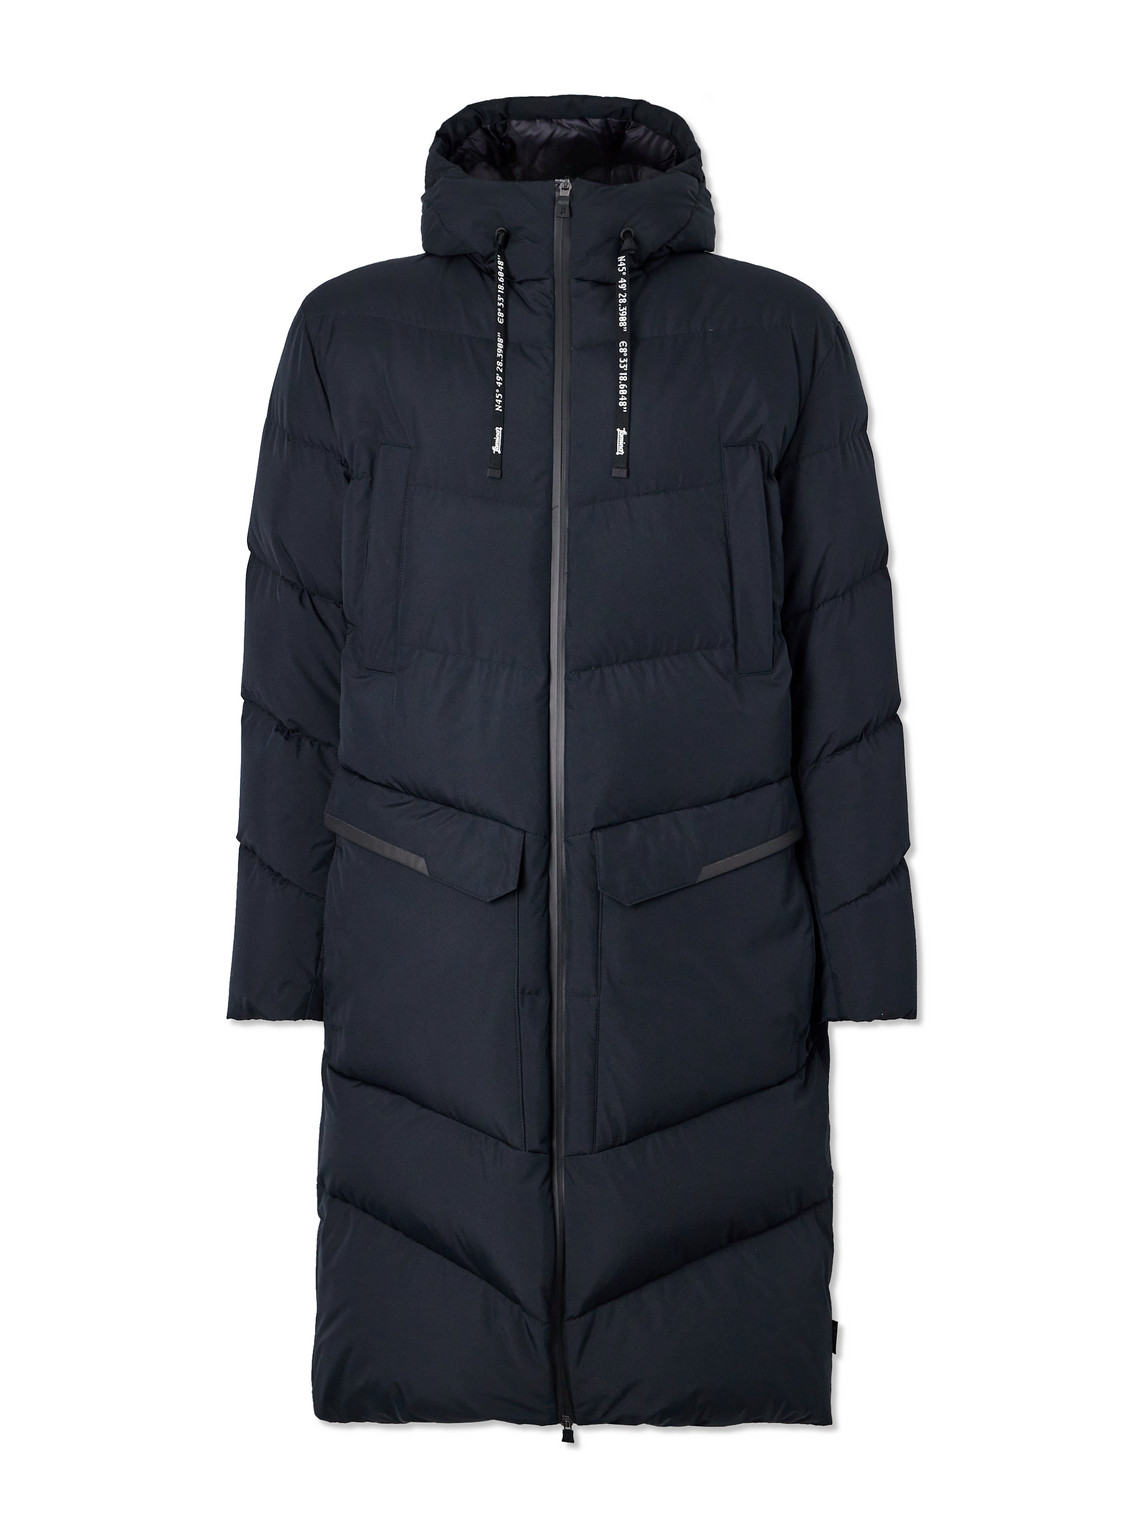 Laminar GORE-TEX® Quilted Down Hooded Jacket